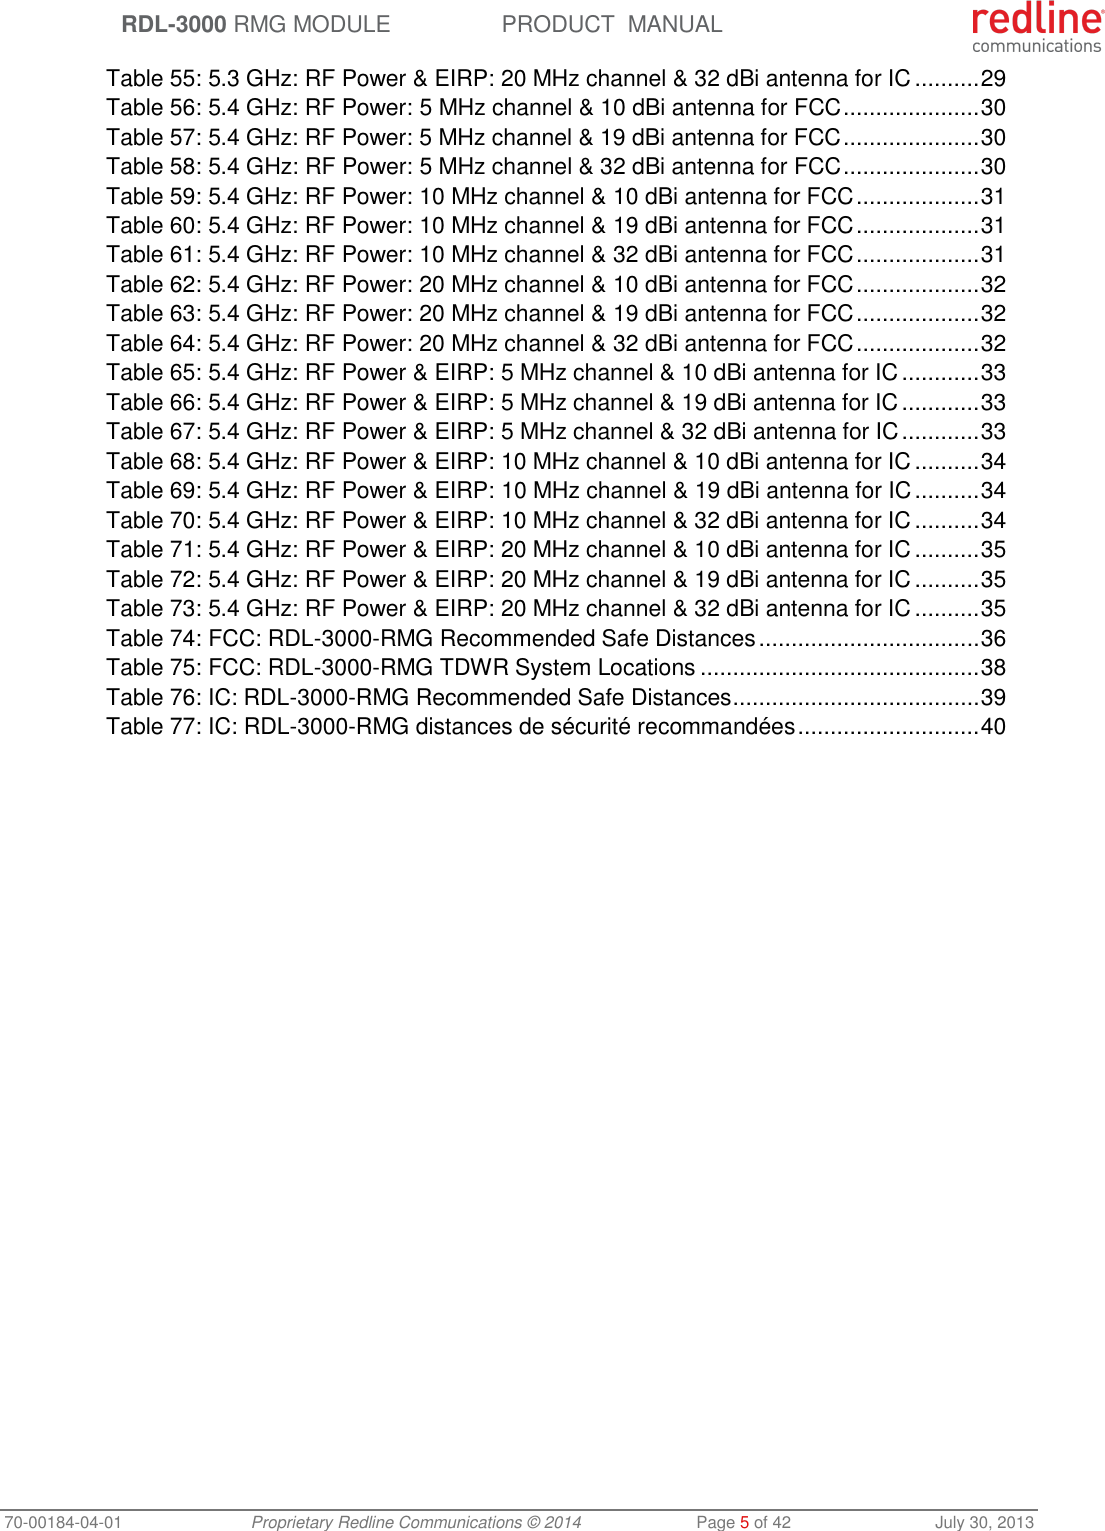  RDL-3000 RMG MODULE PRODUCT  MANUAL 70-00184-04-01 Proprietary Redline Communications © 2014  Page 5 of 42  July 30, 2013 Table 55: 5.3 GHz: RF Power &amp; EIRP: 20 MHz channel &amp; 32 dBi antenna for IC .......... 29 Table 56: 5.4 GHz: RF Power: 5 MHz channel &amp; 10 dBi antenna for FCC ..................... 30 Table 57: 5.4 GHz: RF Power: 5 MHz channel &amp; 19 dBi antenna for FCC ..................... 30 Table 58: 5.4 GHz: RF Power: 5 MHz channel &amp; 32 dBi antenna for FCC ..................... 30 Table 59: 5.4 GHz: RF Power: 10 MHz channel &amp; 10 dBi antenna for FCC ................... 31 Table 60: 5.4 GHz: RF Power: 10 MHz channel &amp; 19 dBi antenna for FCC ................... 31 Table 61: 5.4 GHz: RF Power: 10 MHz channel &amp; 32 dBi antenna for FCC ................... 31 Table 62: 5.4 GHz: RF Power: 20 MHz channel &amp; 10 dBi antenna for FCC ................... 32 Table 63: 5.4 GHz: RF Power: 20 MHz channel &amp; 19 dBi antenna for FCC ................... 32 Table 64: 5.4 GHz: RF Power: 20 MHz channel &amp; 32 dBi antenna for FCC ................... 32 Table 65: 5.4 GHz: RF Power &amp; EIRP: 5 MHz channel &amp; 10 dBi antenna for IC ............ 33 Table 66: 5.4 GHz: RF Power &amp; EIRP: 5 MHz channel &amp; 19 dBi antenna for IC ............ 33 Table 67: 5.4 GHz: RF Power &amp; EIRP: 5 MHz channel &amp; 32 dBi antenna for IC ............ 33 Table 68: 5.4 GHz: RF Power &amp; EIRP: 10 MHz channel &amp; 10 dBi antenna for IC .......... 34 Table 69: 5.4 GHz: RF Power &amp; EIRP: 10 MHz channel &amp; 19 dBi antenna for IC .......... 34 Table 70: 5.4 GHz: RF Power &amp; EIRP: 10 MHz channel &amp; 32 dBi antenna for IC .......... 34 Table 71: 5.4 GHz: RF Power &amp; EIRP: 20 MHz channel &amp; 10 dBi antenna for IC .......... 35 Table 72: 5.4 GHz: RF Power &amp; EIRP: 20 MHz channel &amp; 19 dBi antenna for IC .......... 35 Table 73: 5.4 GHz: RF Power &amp; EIRP: 20 MHz channel &amp; 32 dBi antenna for IC .......... 35 Table 74: FCC: RDL-3000-RMG Recommended Safe Distances .................................. 36 Table 75: FCC: RDL-3000-RMG TDWR System Locations ........................................... 38 Table 76: IC: RDL-3000-RMG Recommended Safe Distances ...................................... 39 Table 77: IC: RDL-3000-RMG distances de sécurité recommandées ............................ 40 